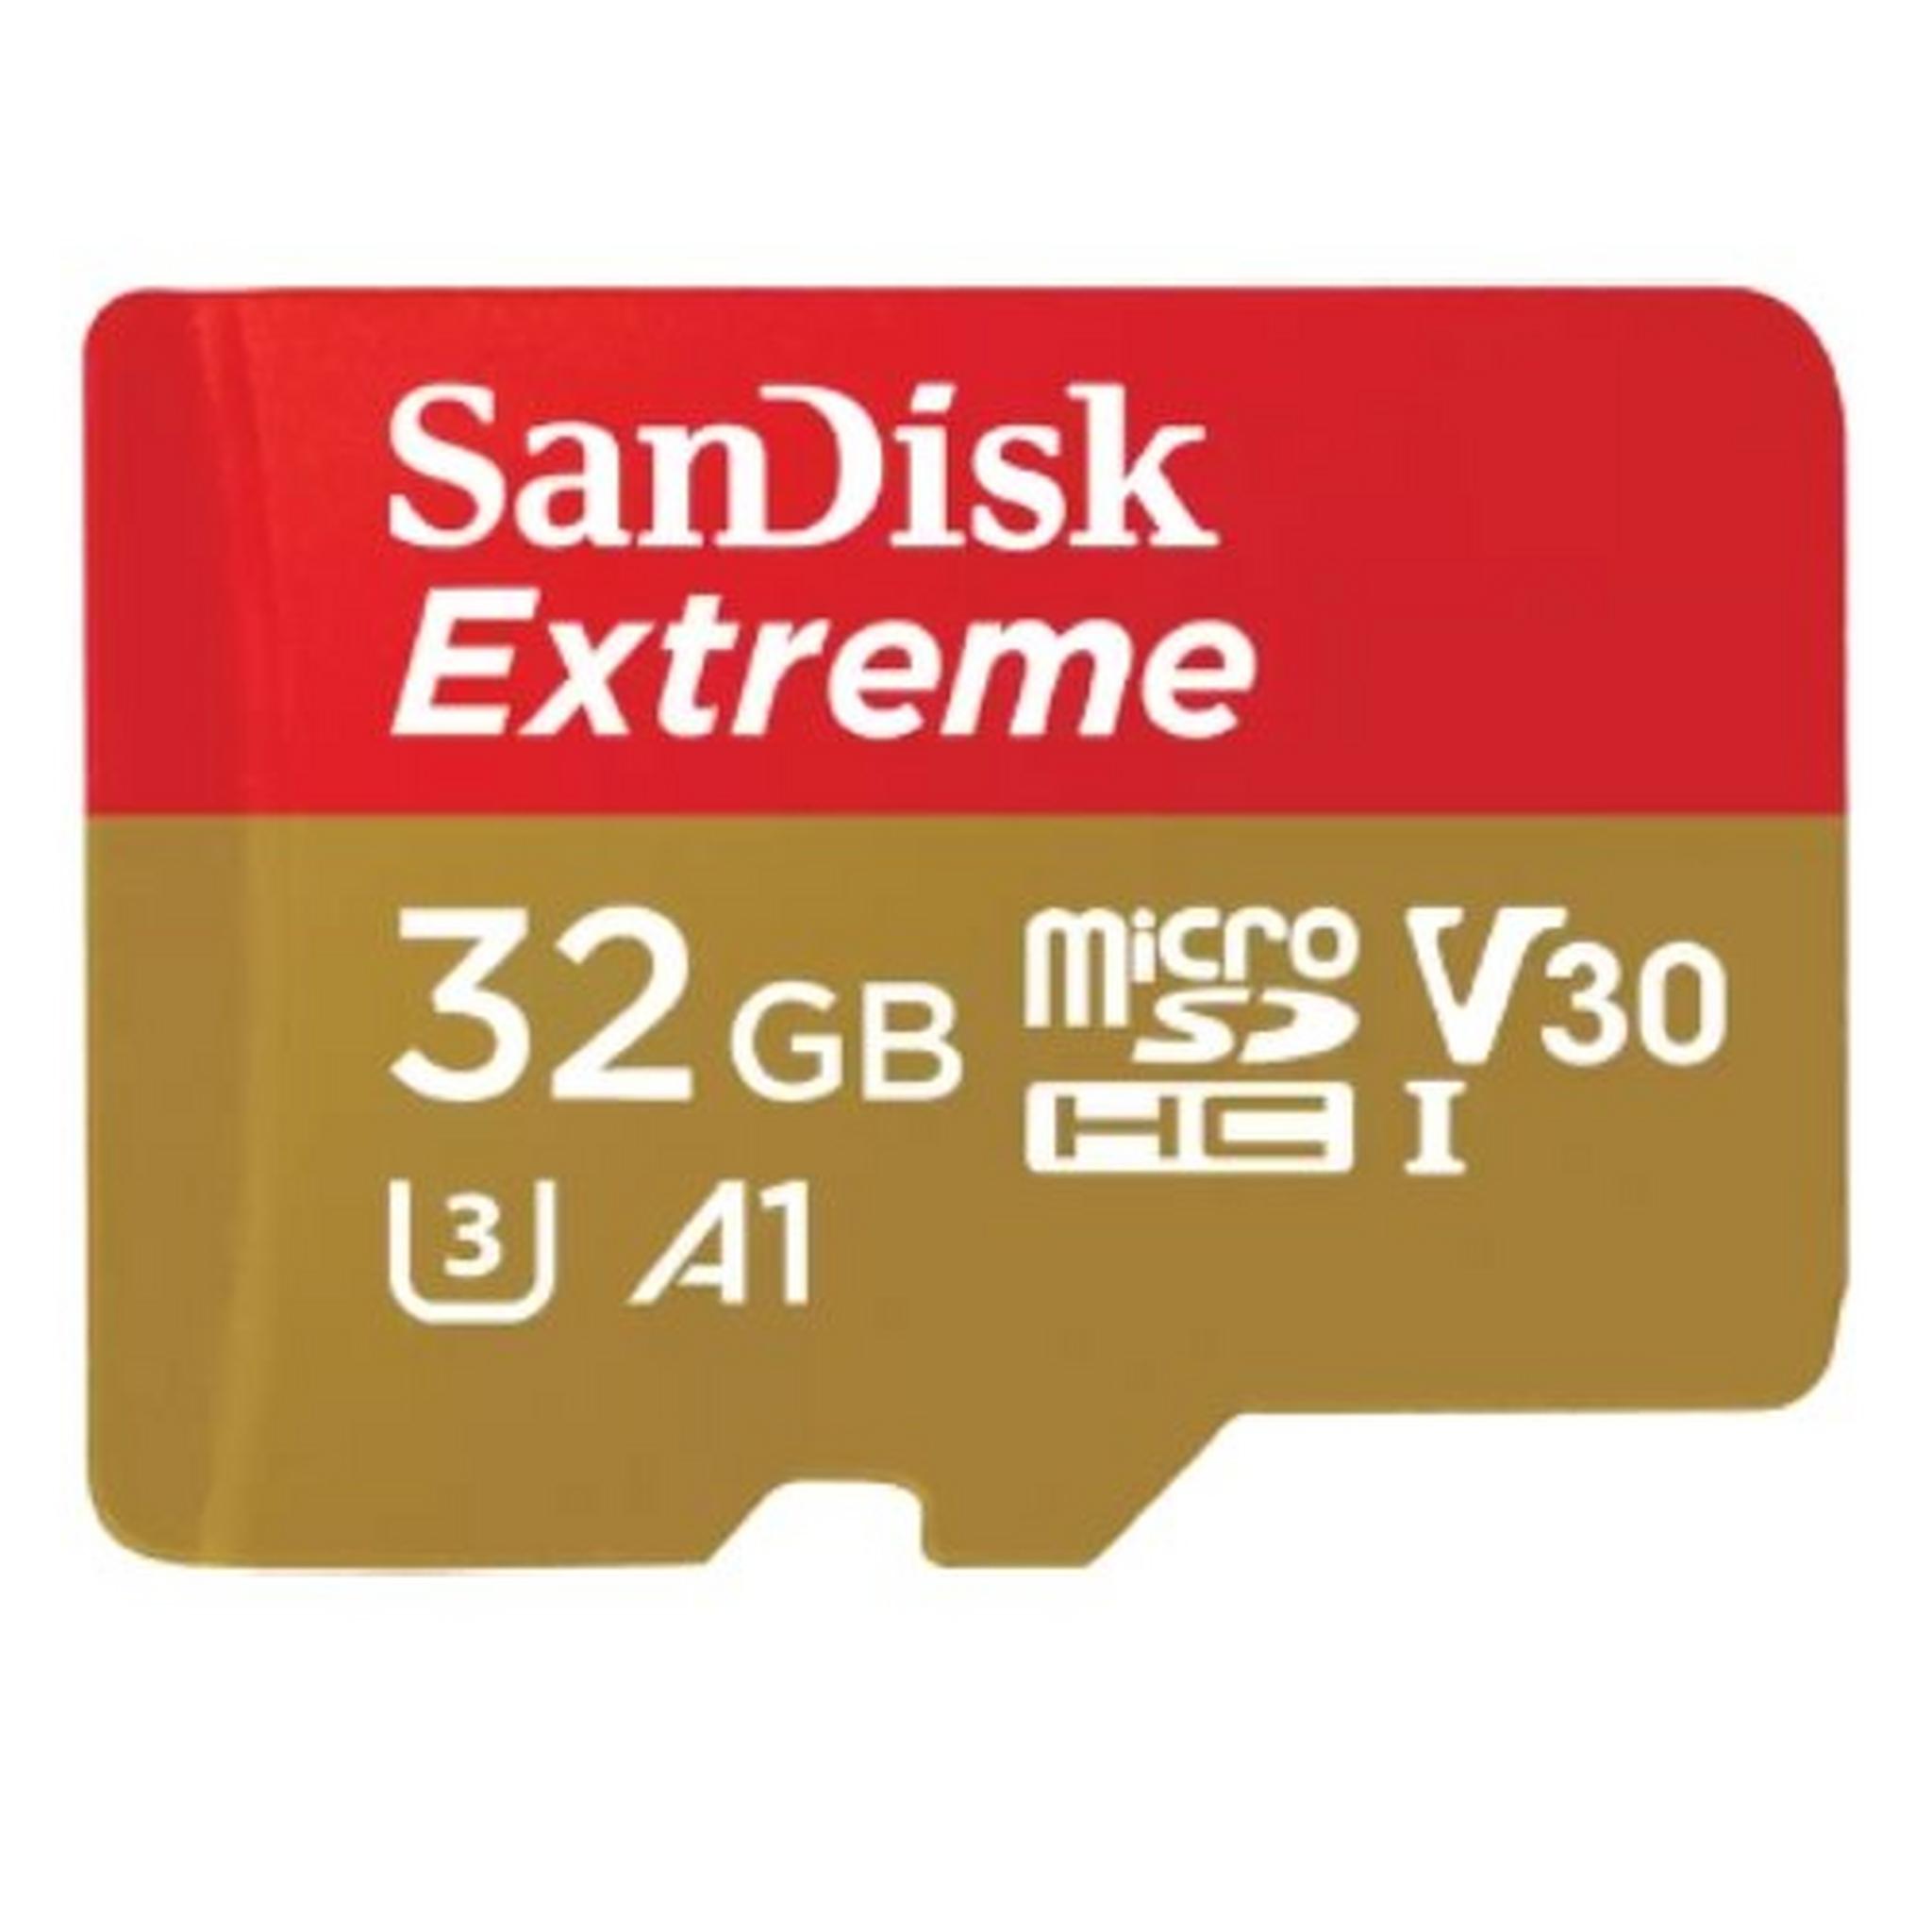 Sandisk Extreme 32GB MicroSD Card for Mobile Gaming